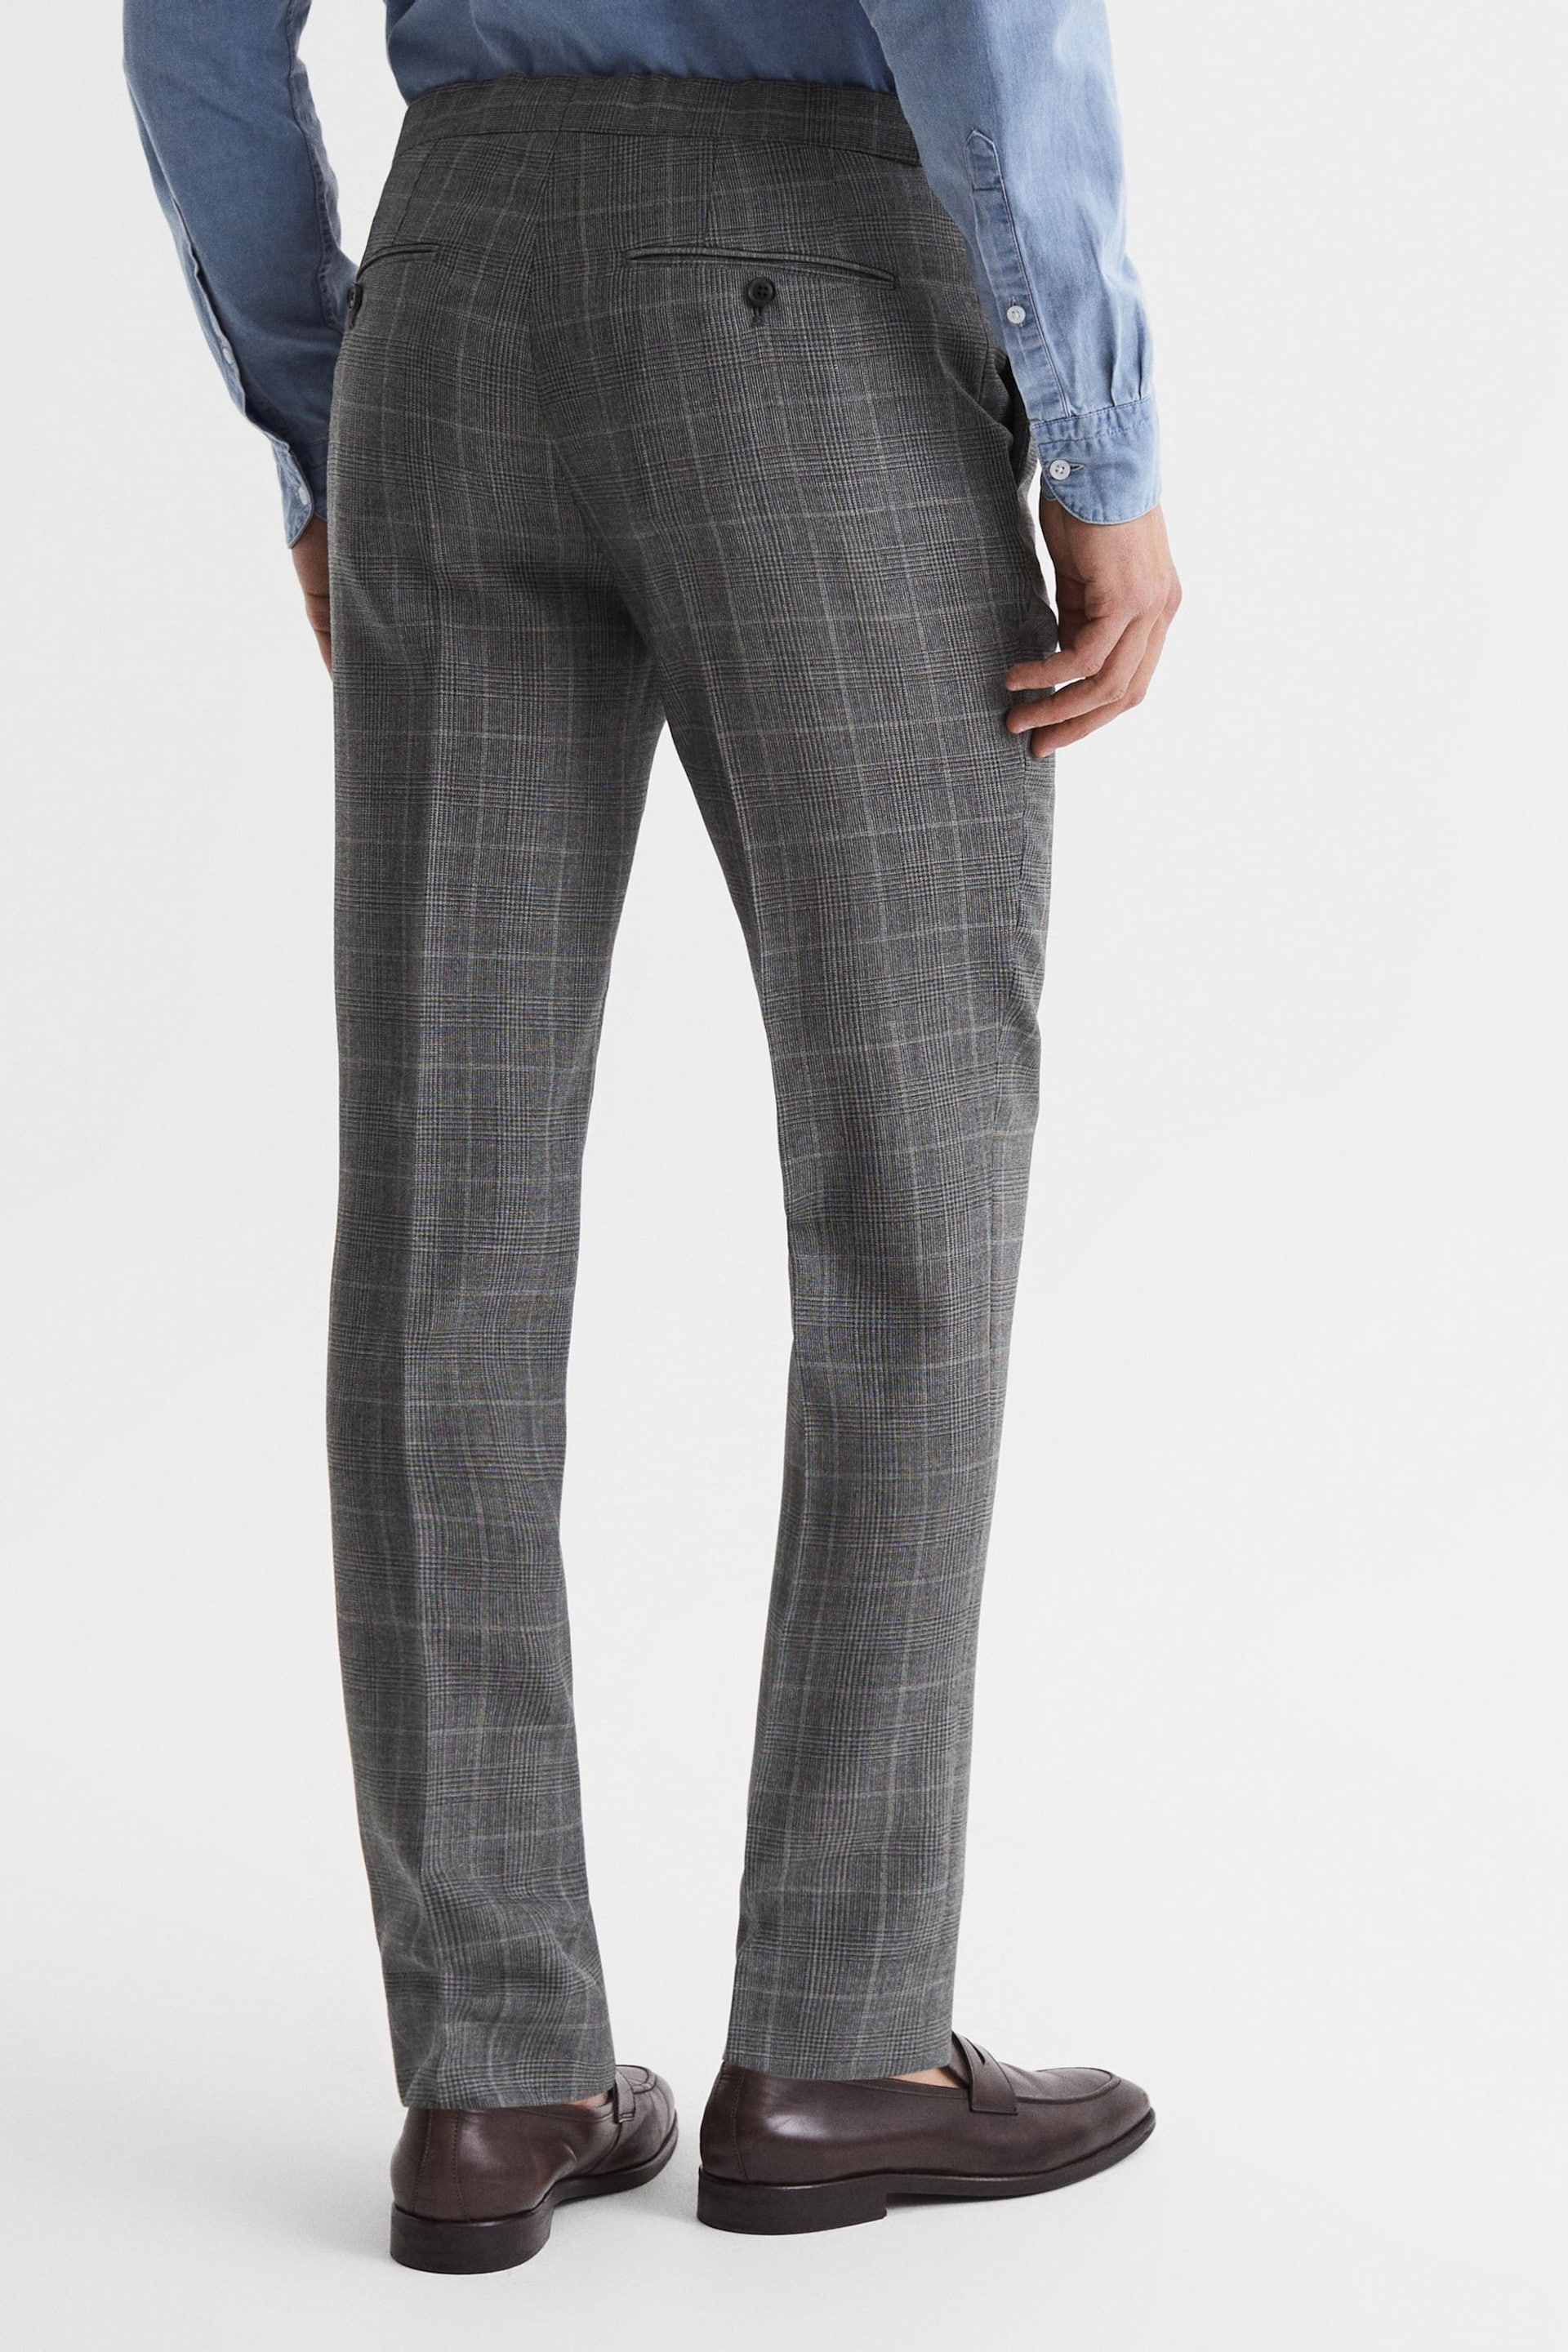 Reiss Grey Newbury Slim Fit Checked Trousers - Image 5 of 7